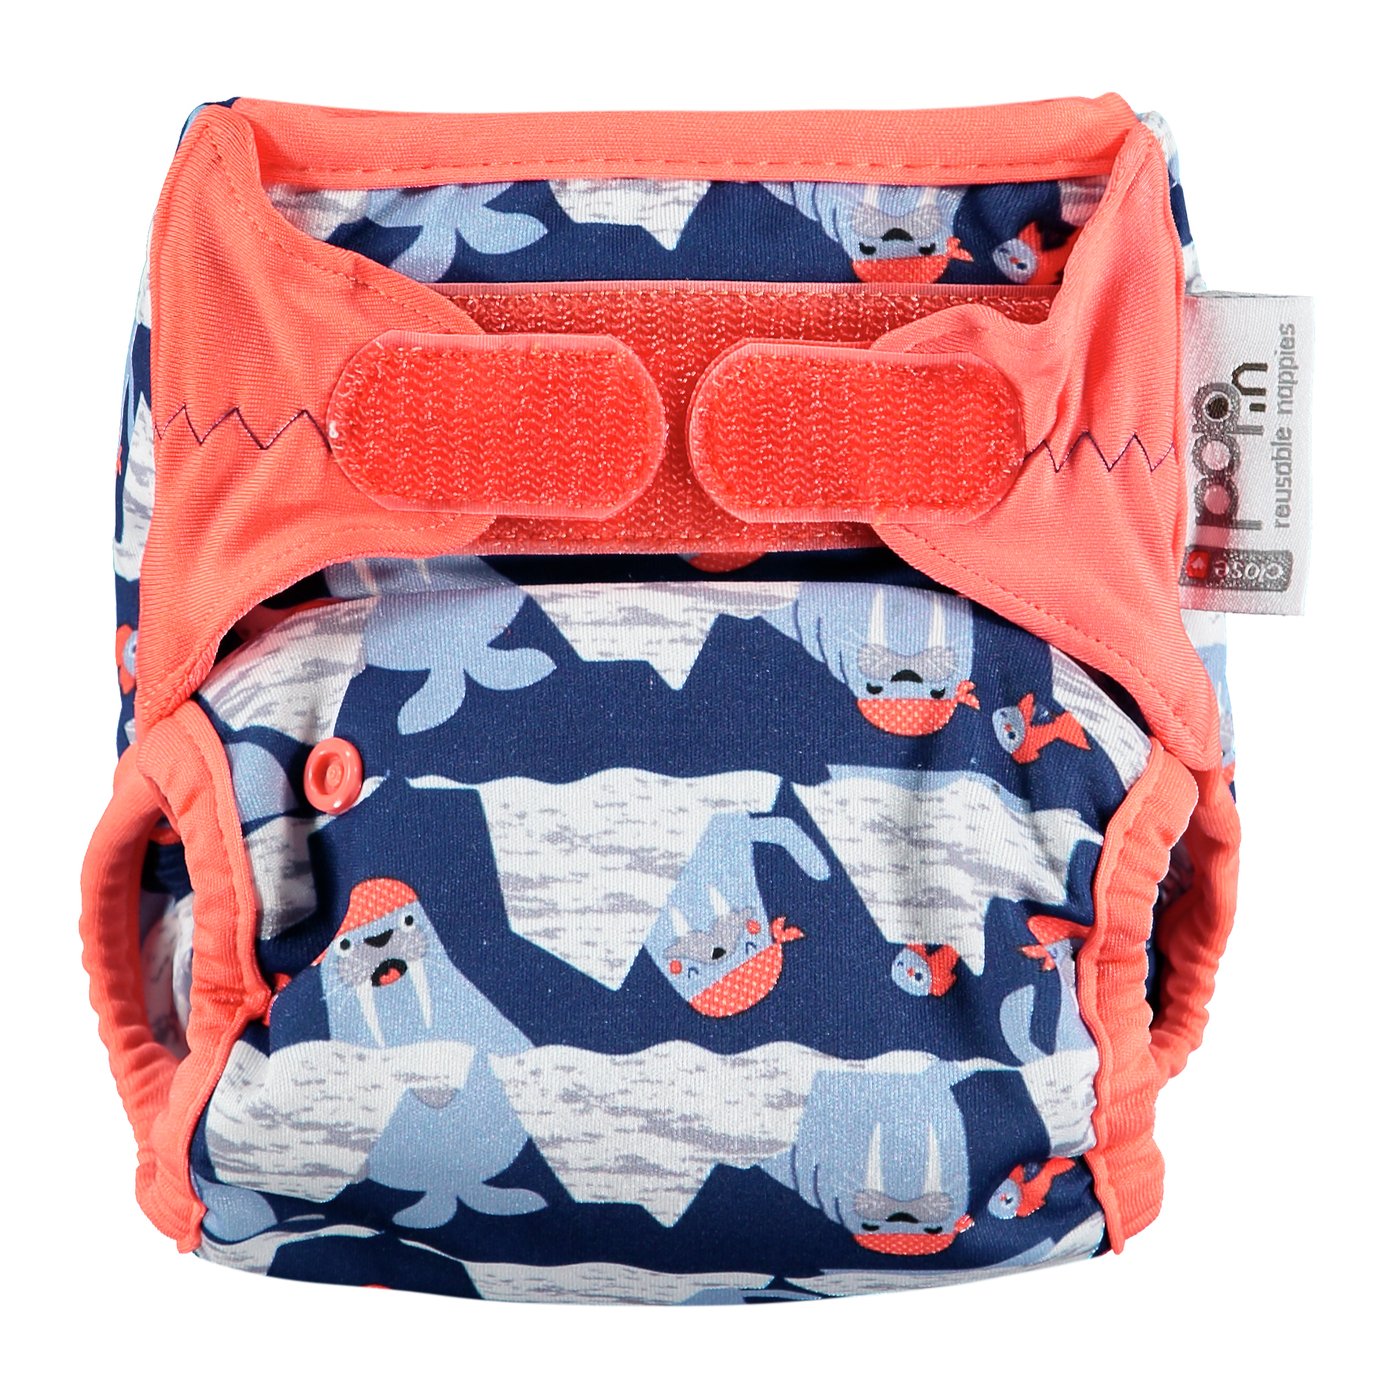 Pop-in Reusable Nappy Review